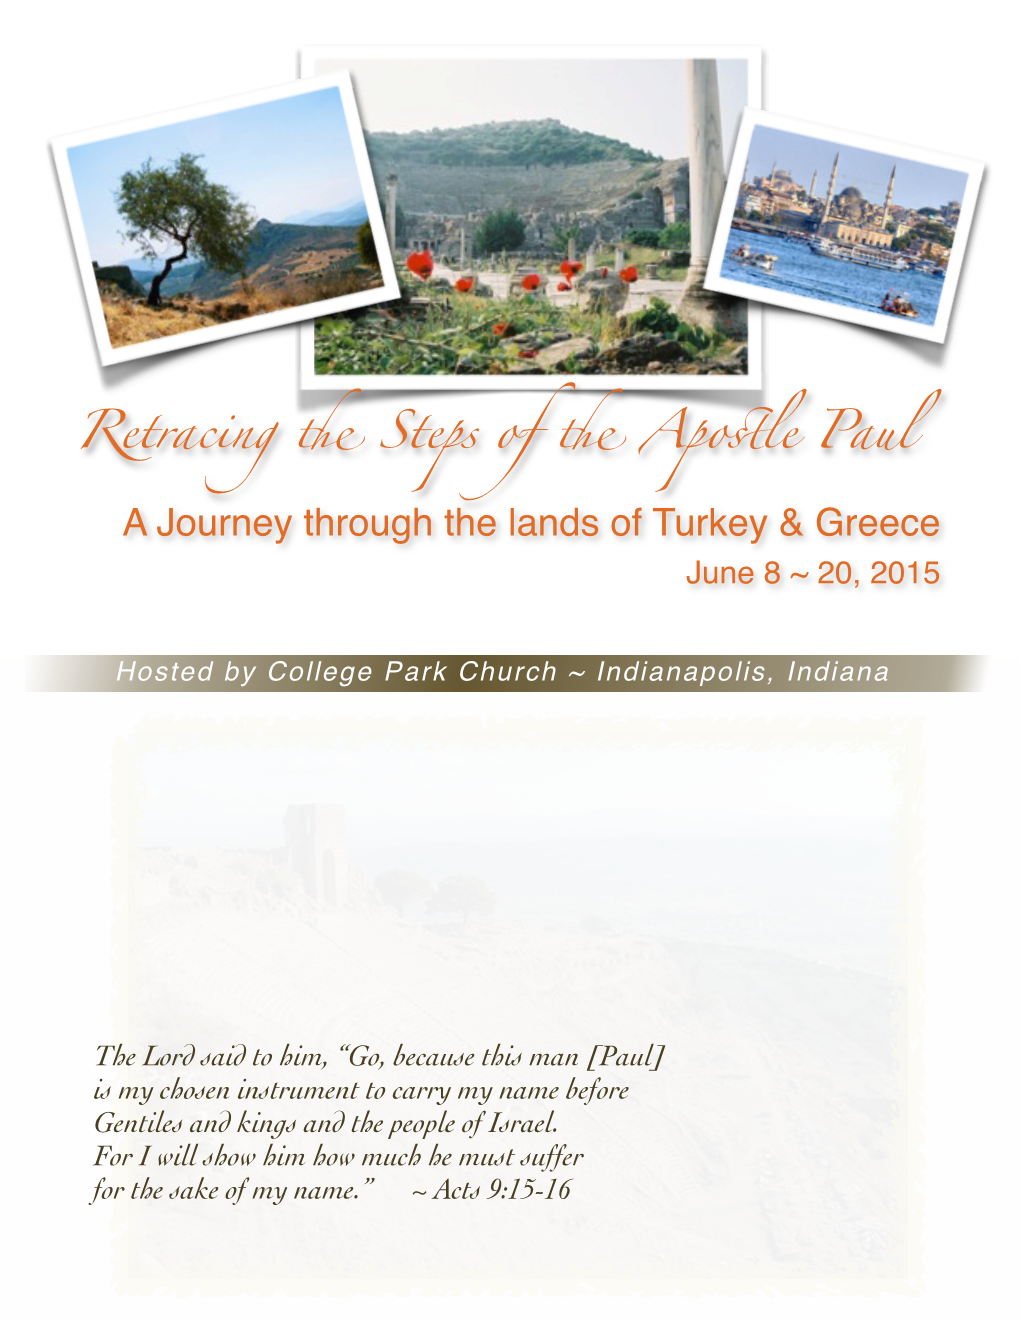 A Journey Through the Lands of Turkey & Greece